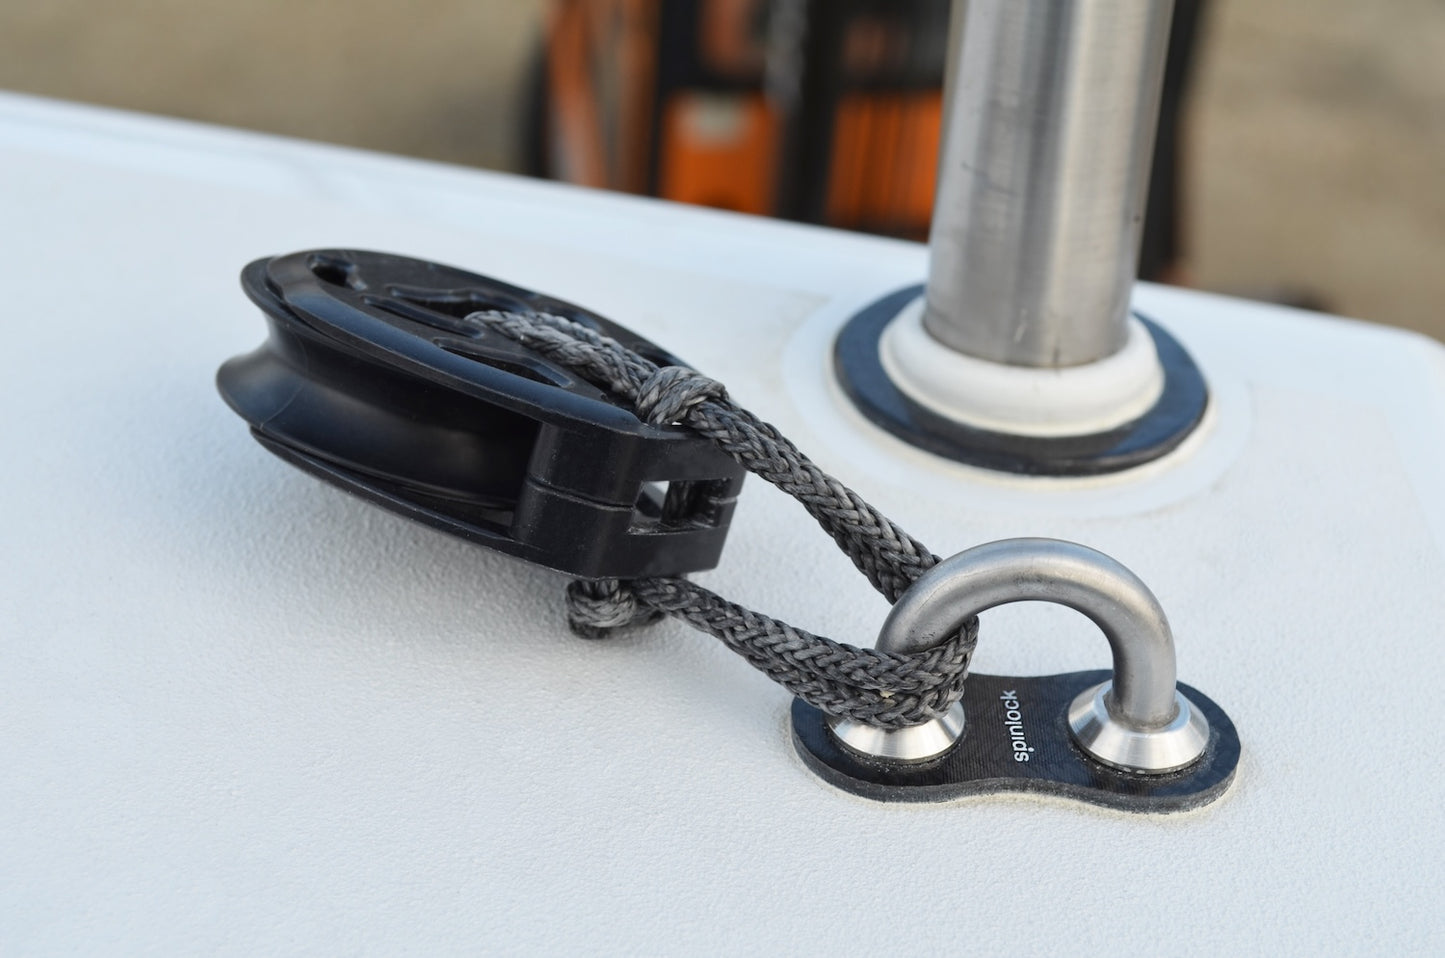 Spinlock High-Strength Padeye 10mm In 17-4PH with Carbon Plates | SendIt Sailing